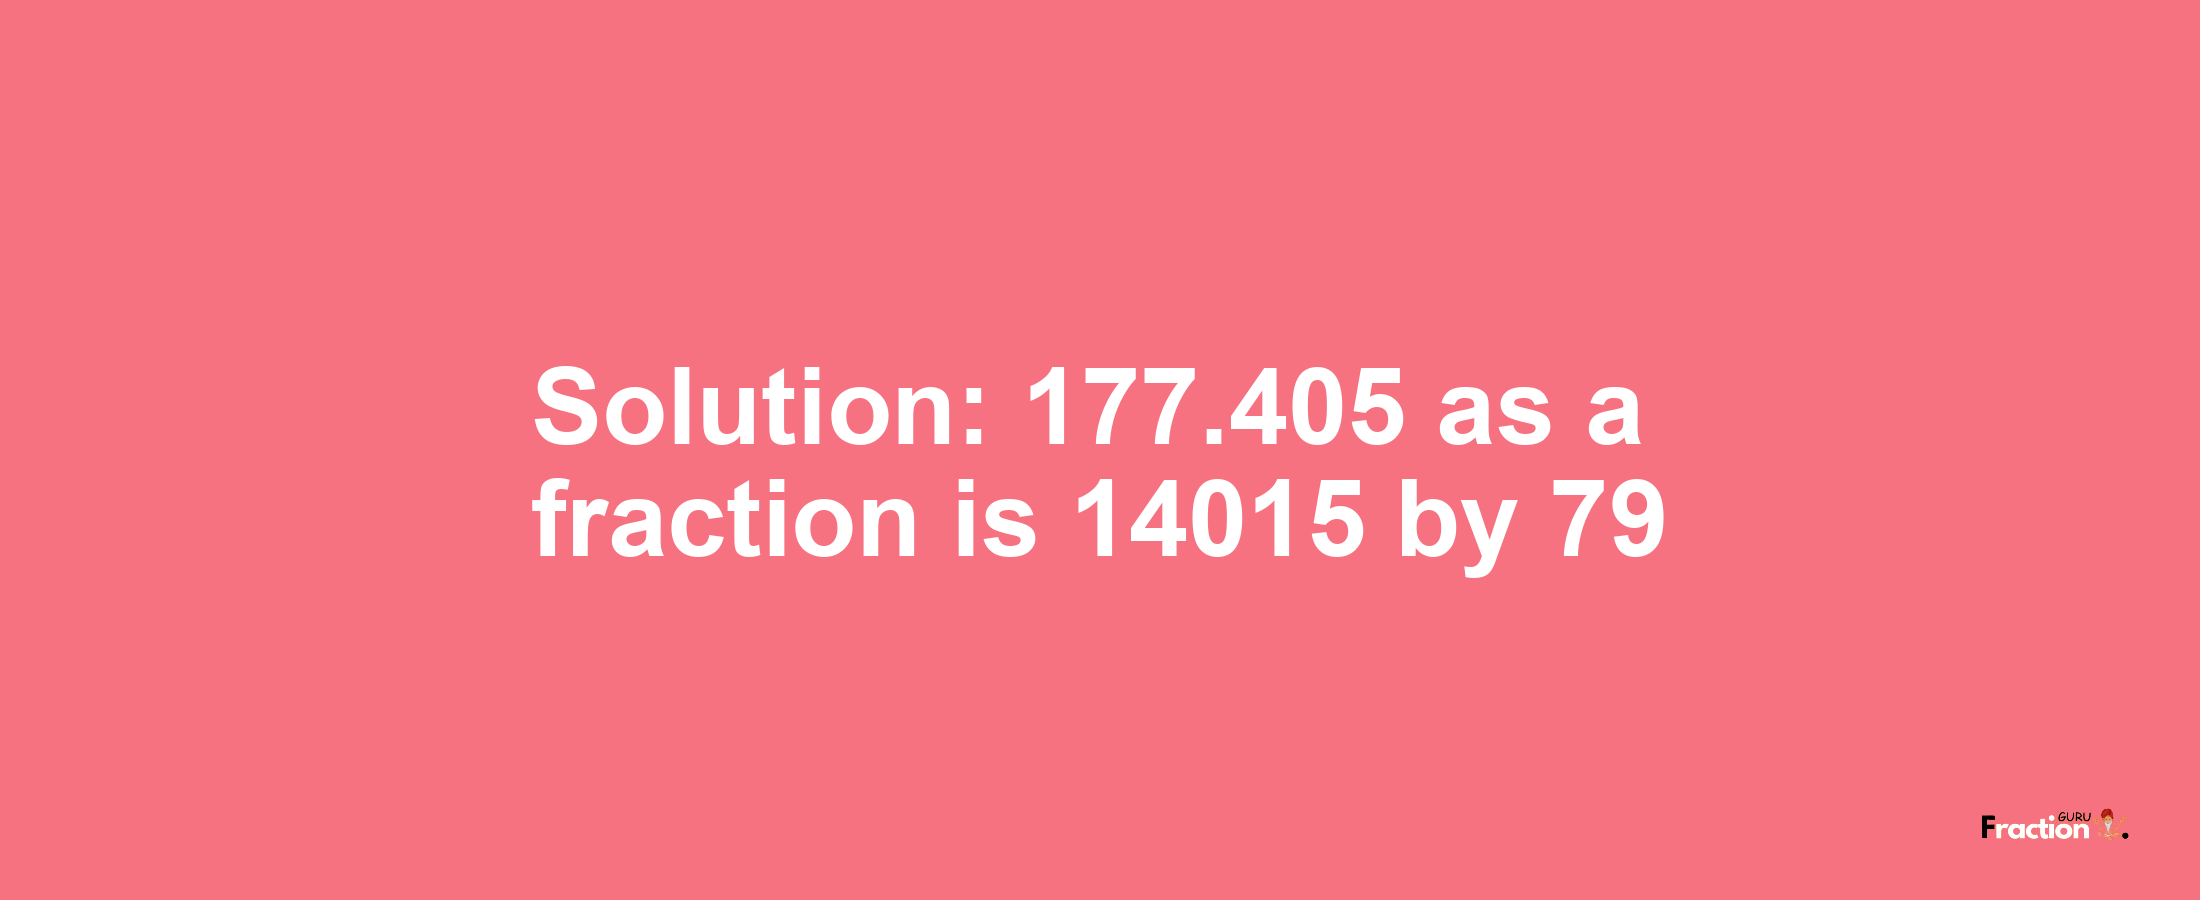 Solution:177.405 as a fraction is 14015/79